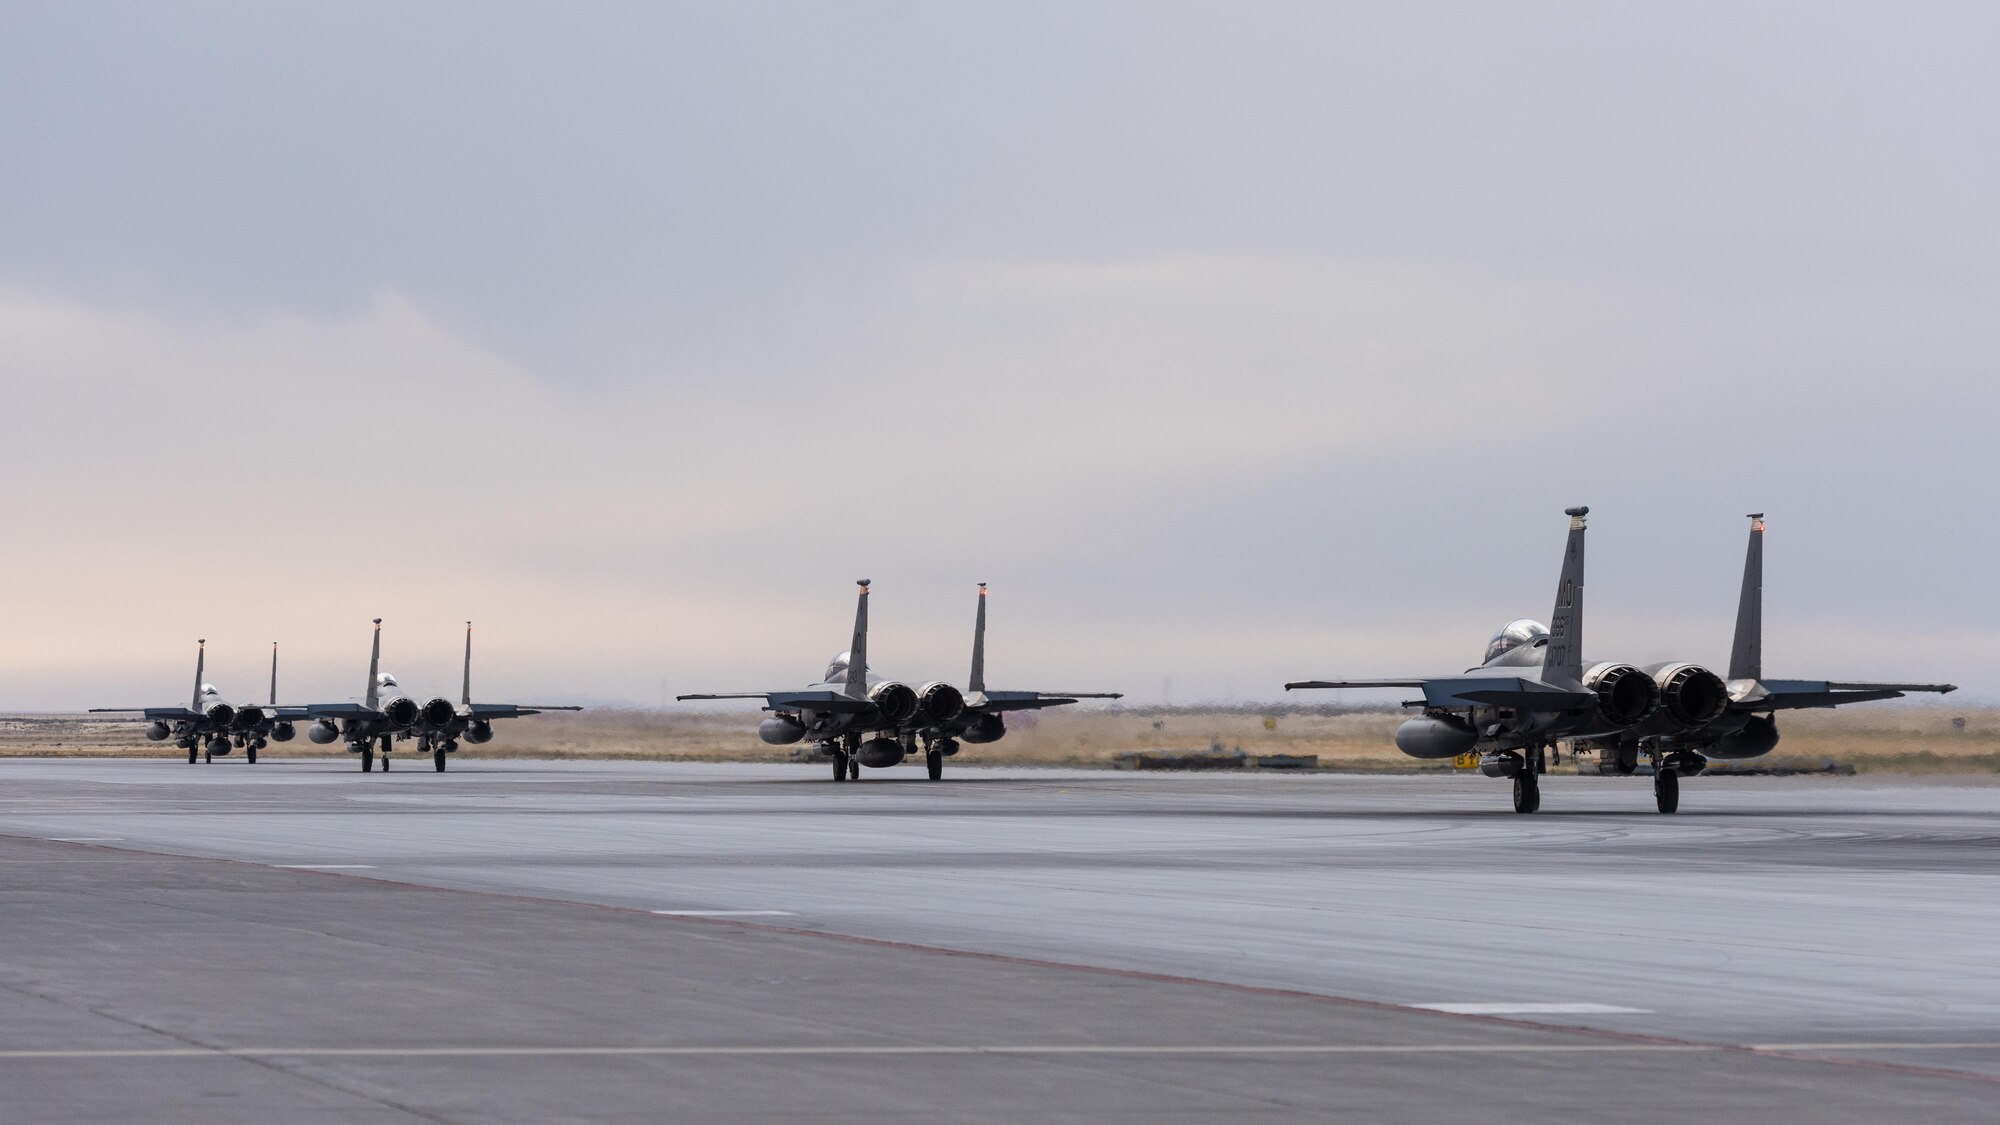 F-15E Strike Eagles taxi down the runway as they prepare to depart to Southwest Asia in support of Operation Inherent Resolve, Oct. 1, 2016, at Mountain Home Air Force Base, Idaho. Hundreds of Gunfighters have deployed in support combat operations across the globe.(U.S. Air Force photo by Senior Airman Connor J. Marth/Released)